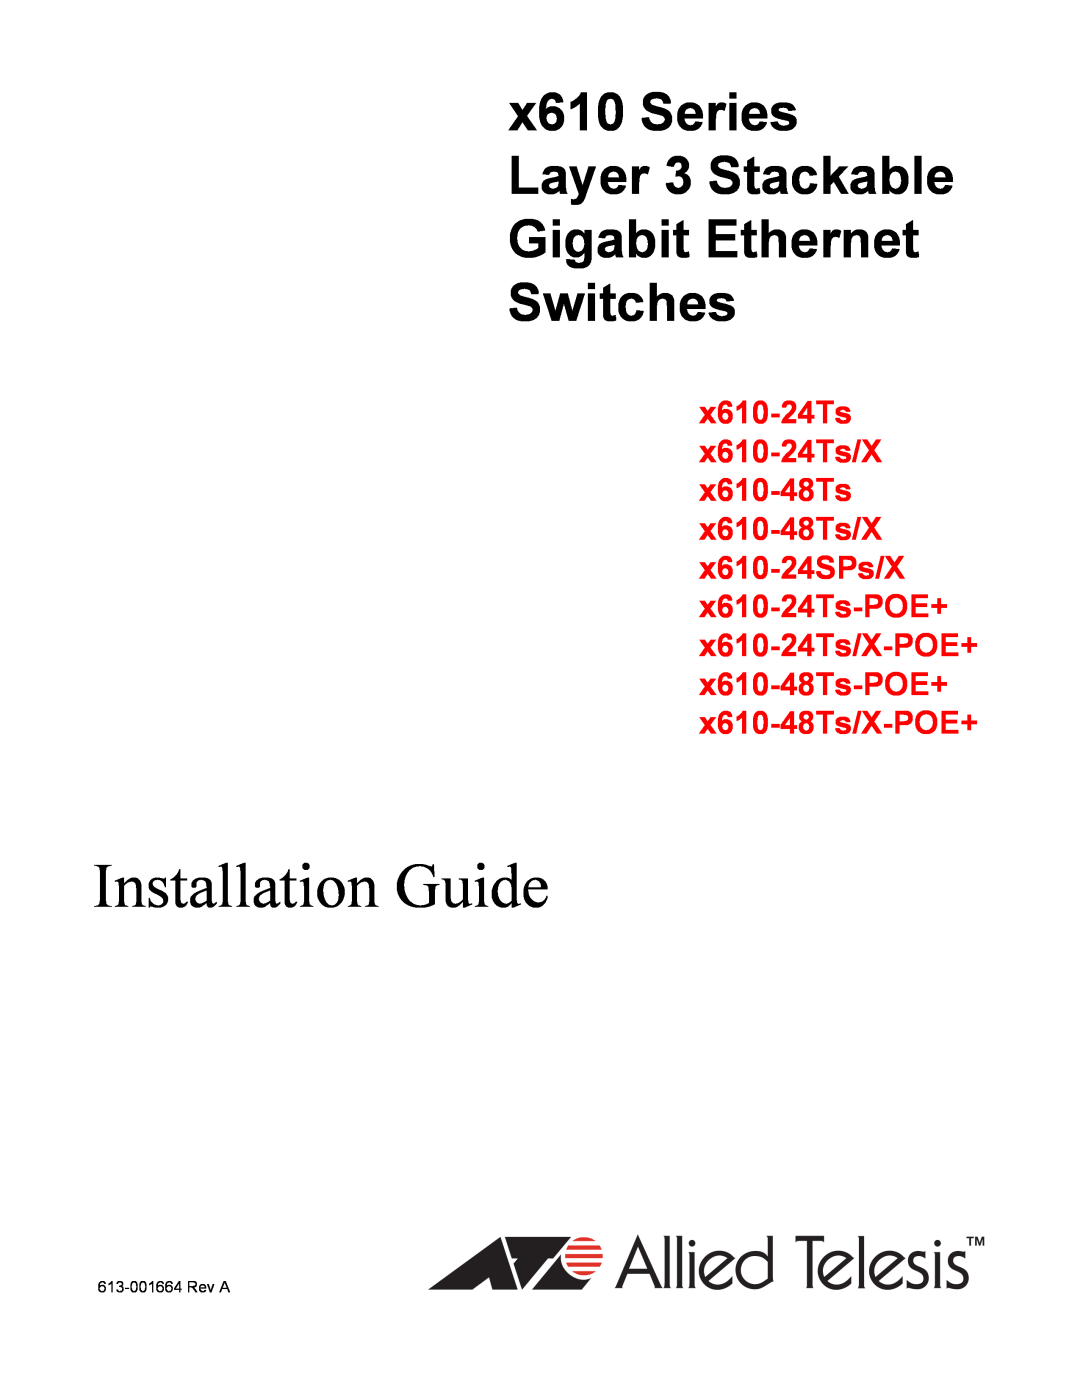 Allied Telesis X610-48TS/X, X610-24TS manual Installation Guide, x610 Series Layer 3 Stackable Gigabit Ethernet Switches 